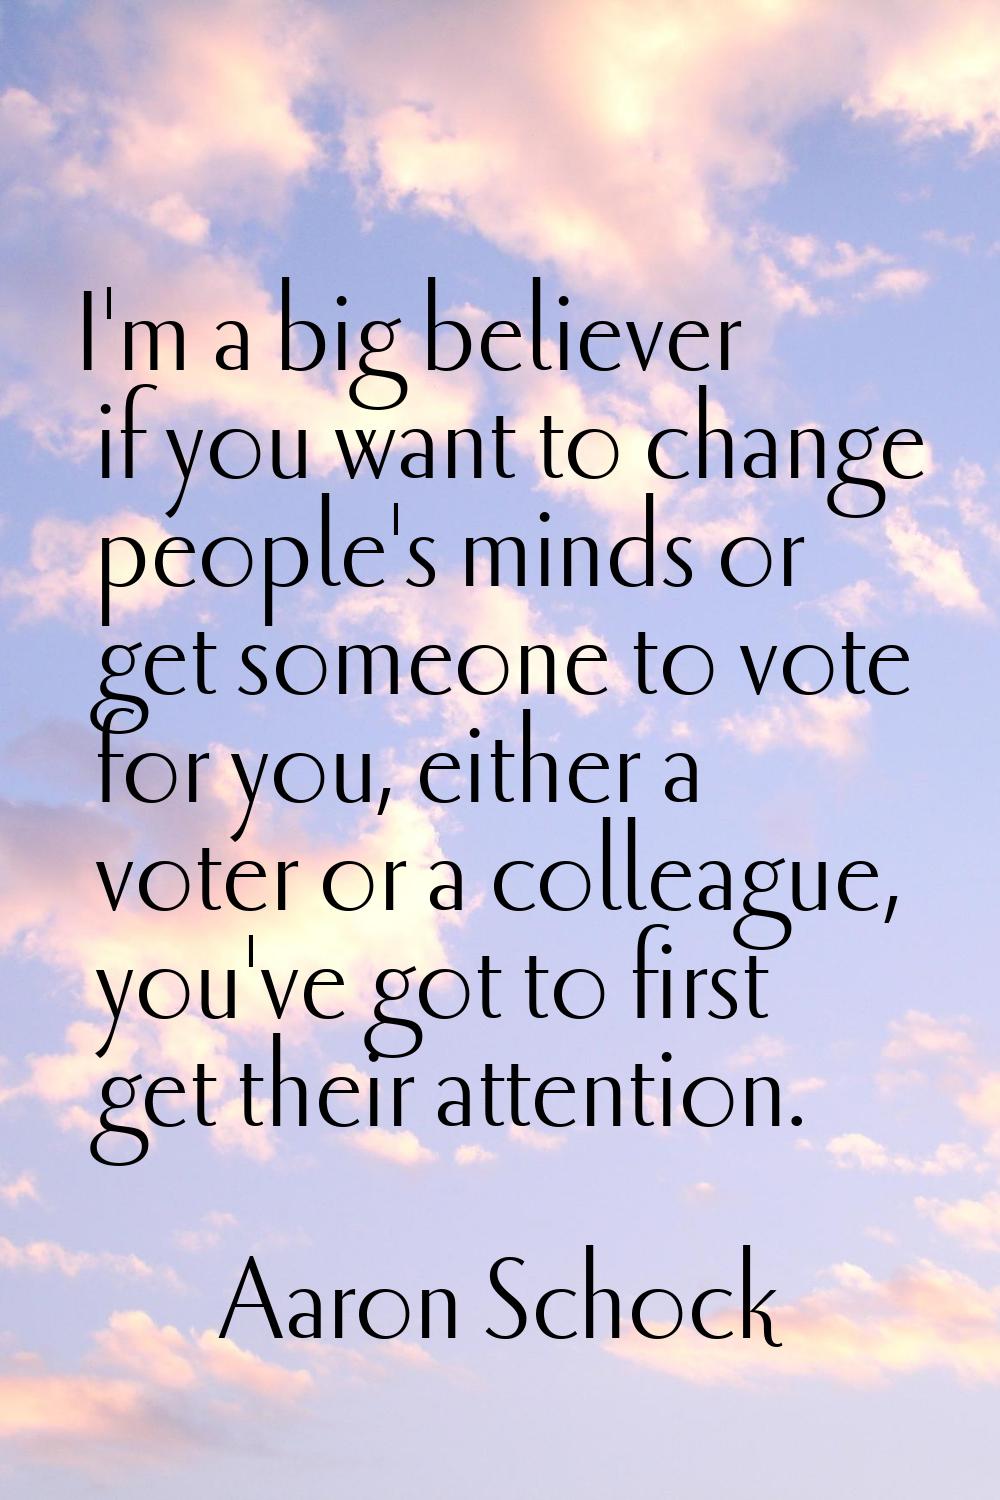 I'm a big believer if you want to change people's minds or get someone to vote for you, either a vo